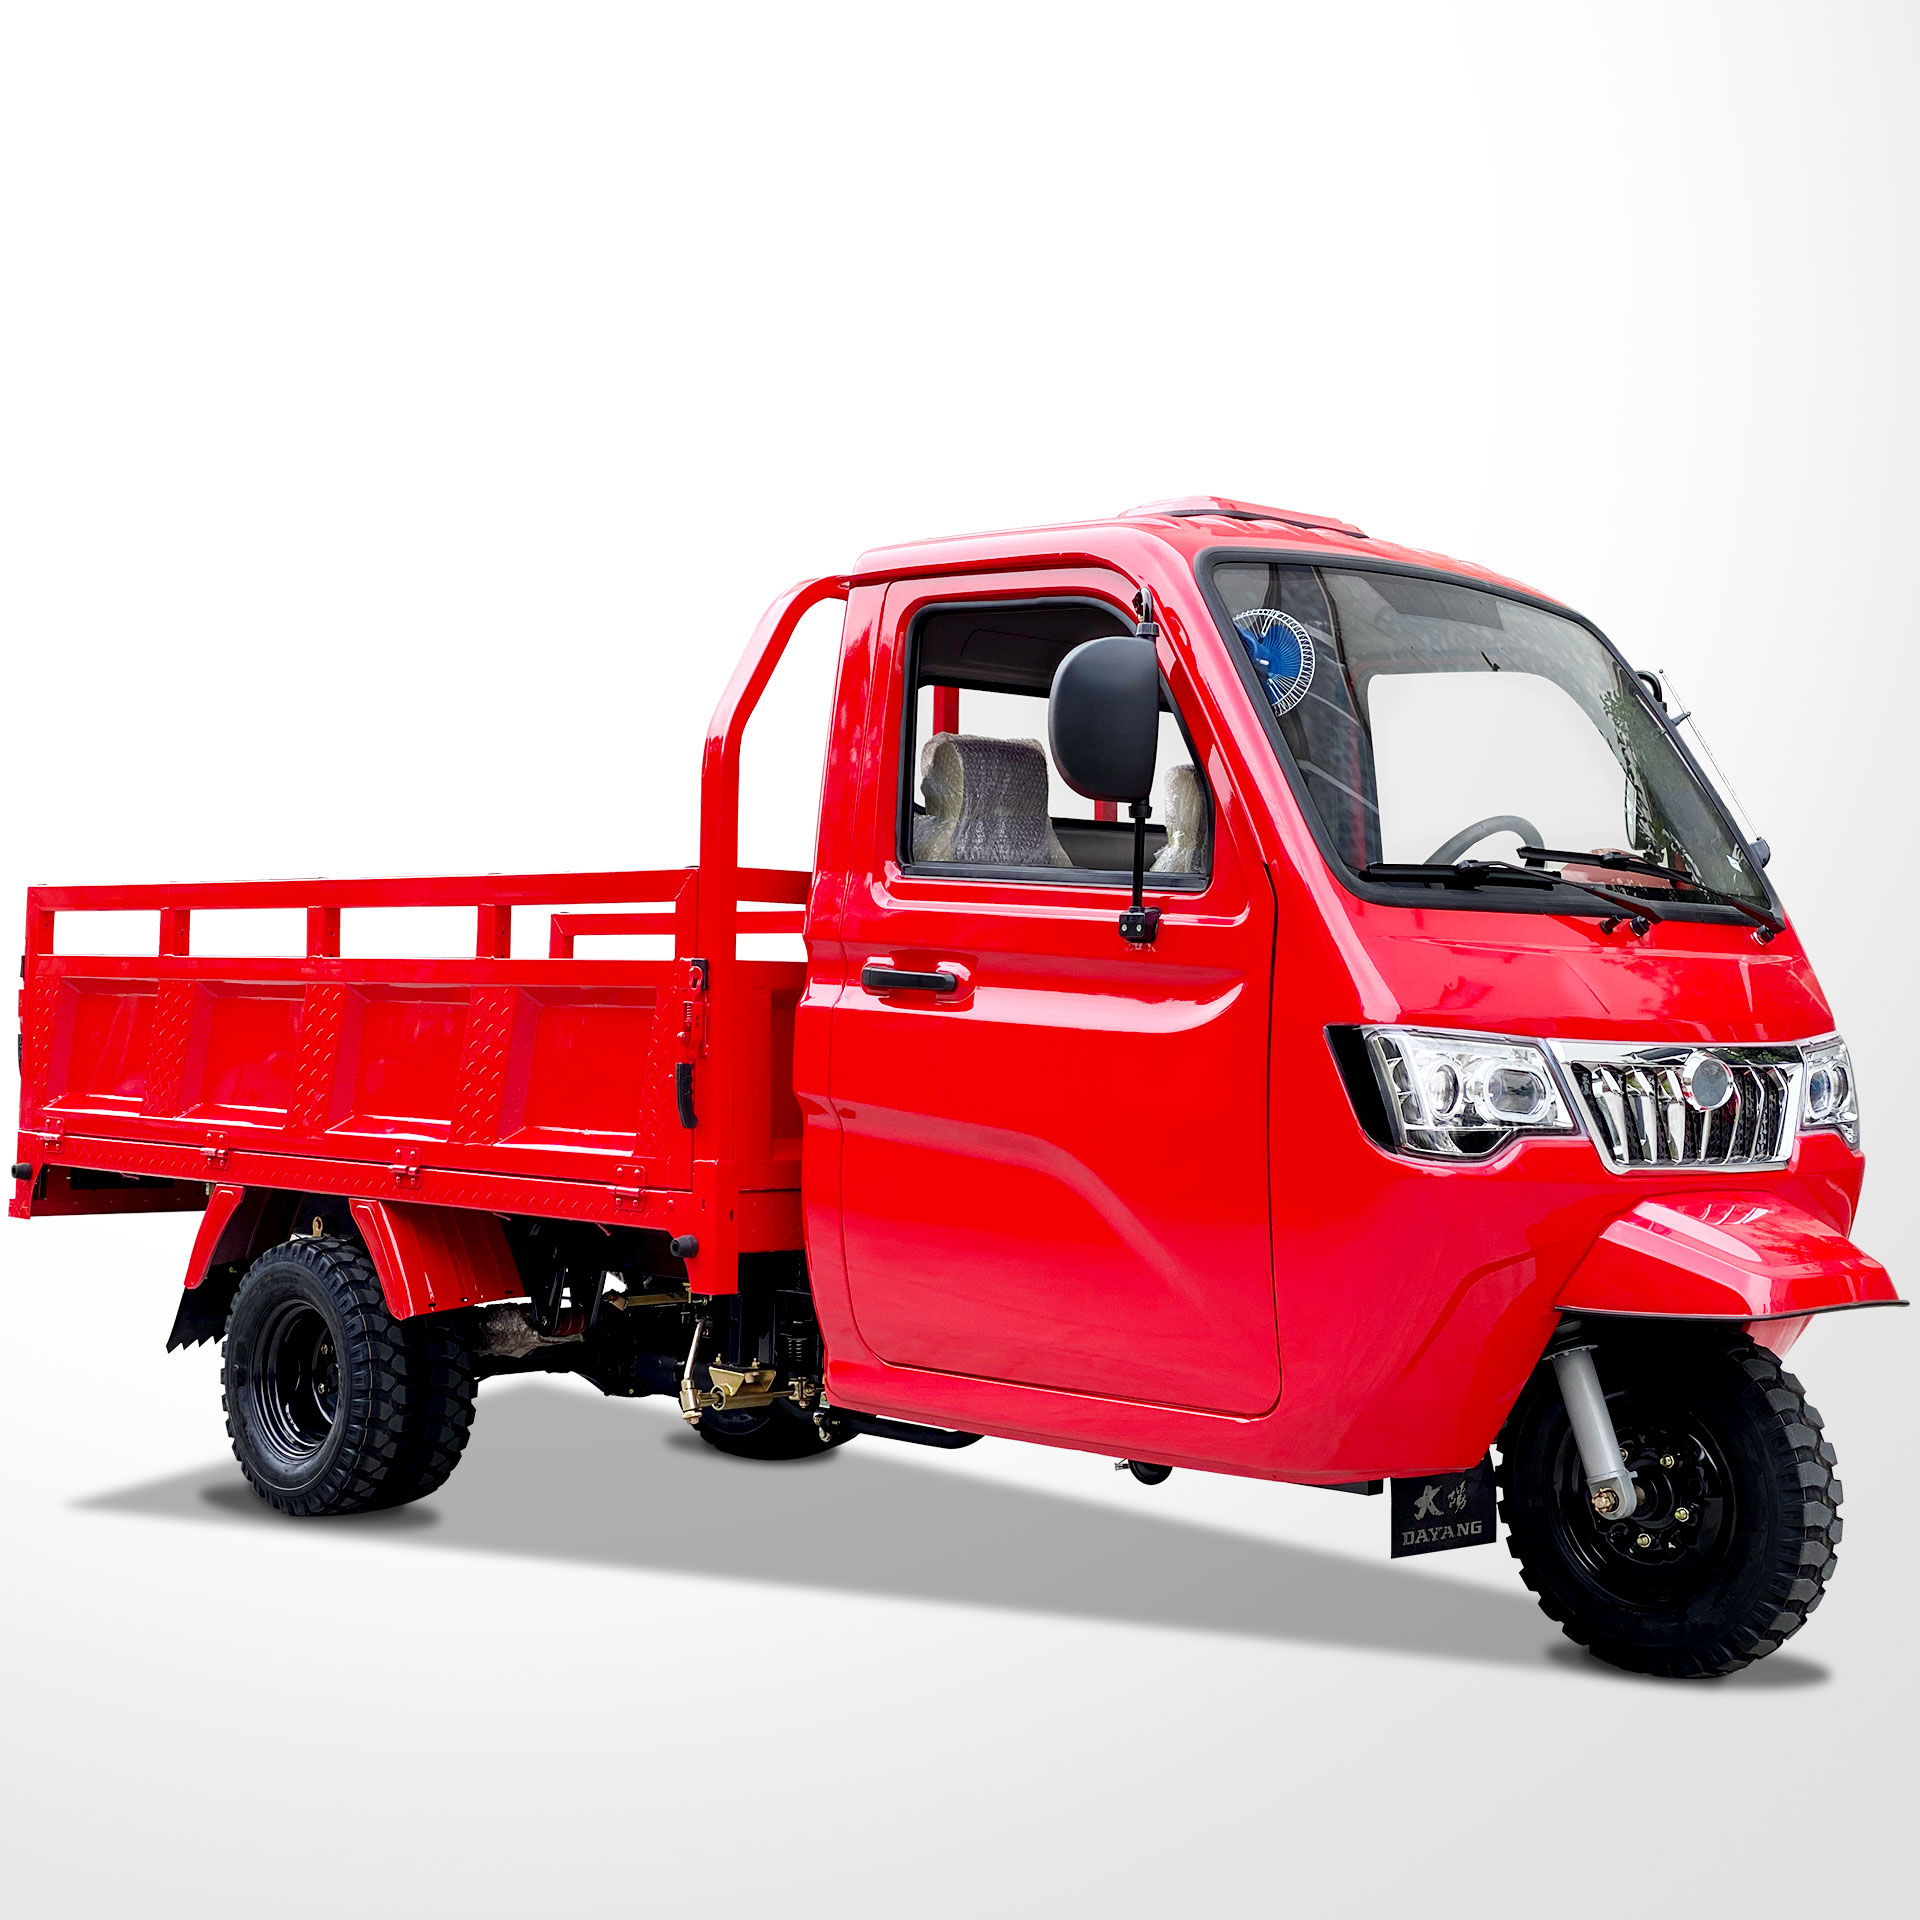 Enclosed cabin heavy loading tricycle 250cc T5  Windproof and rainproof with air conditioning cargo tricycle